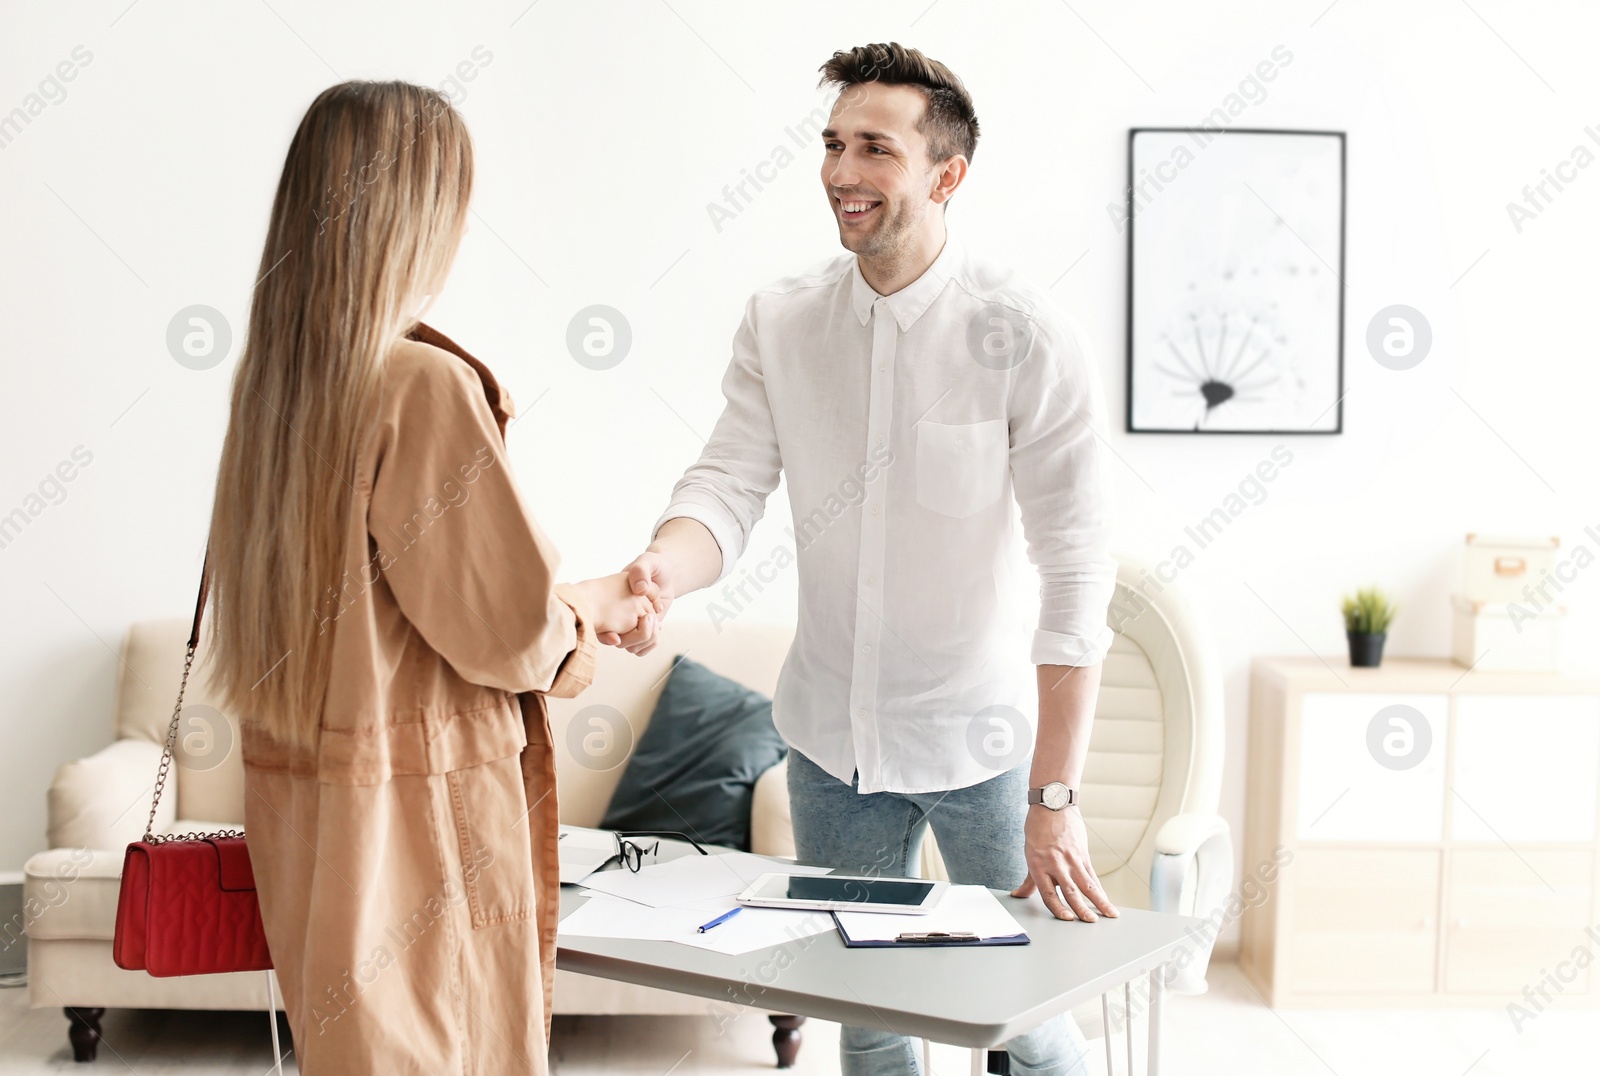 Photo of Human resources manager shaking hands with applicant during job interview in office